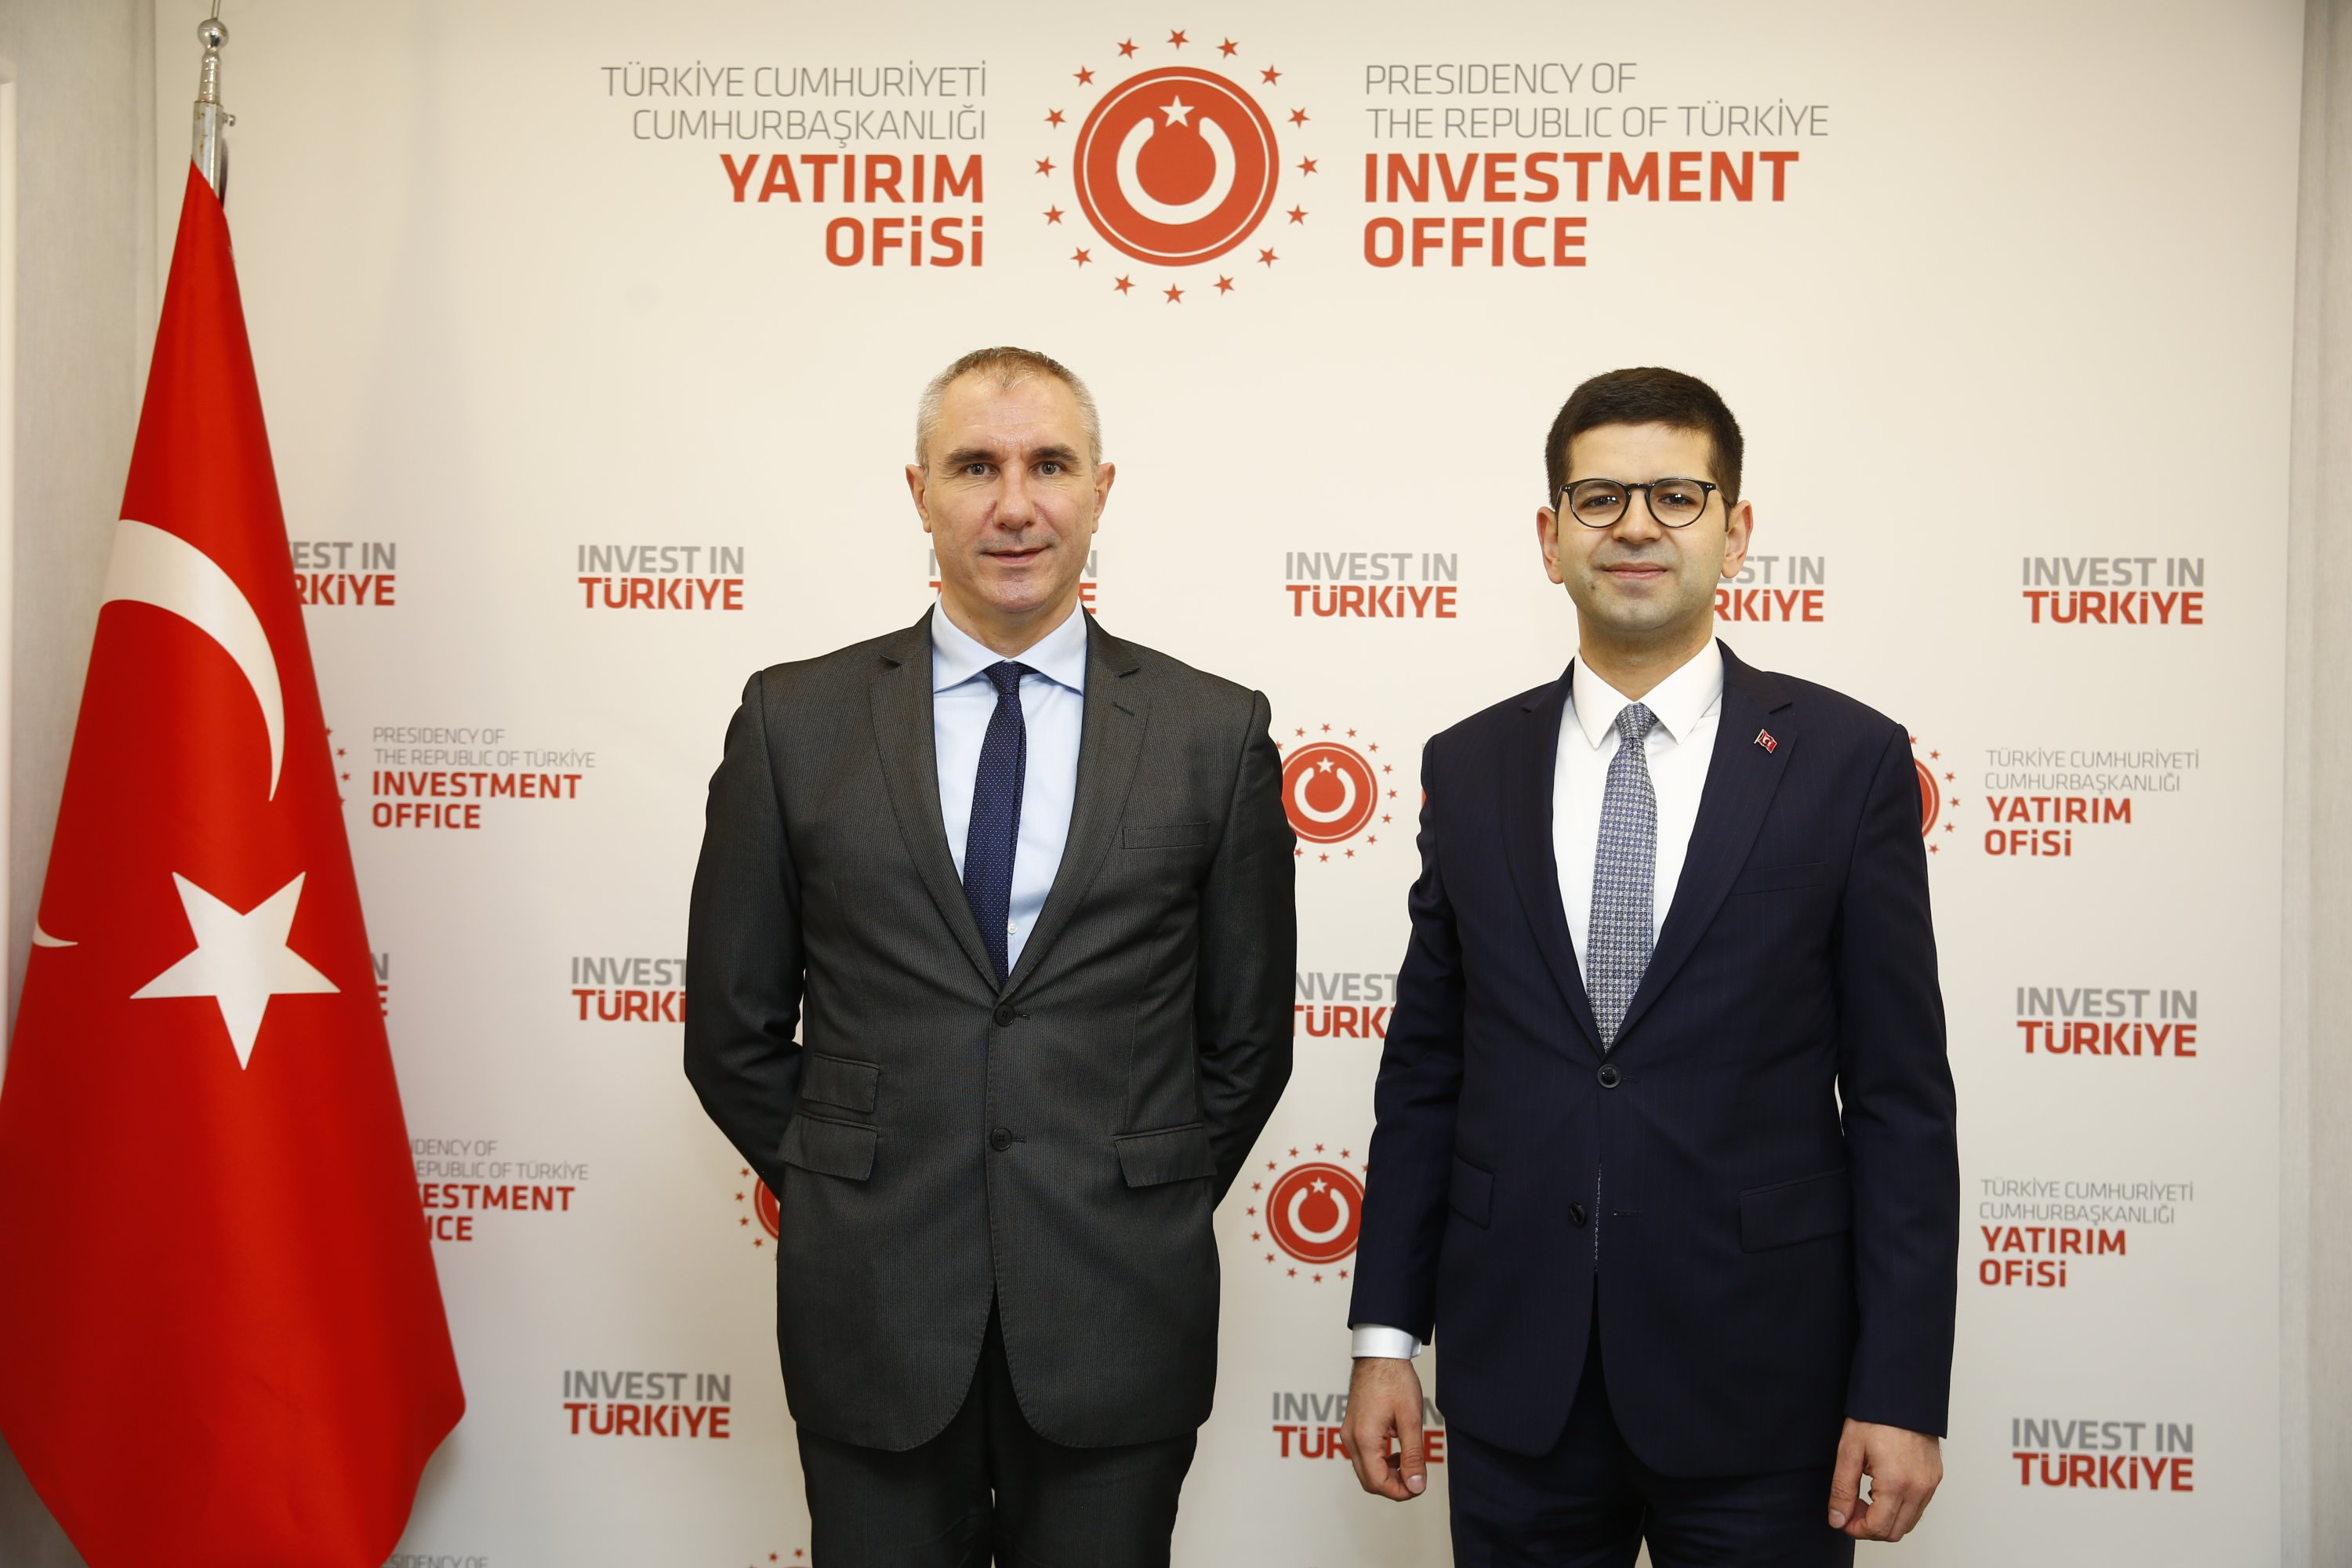 Ahmet Burak Dağlıoğlu (R), the chairperson of Turkey’s Investment Office, poses with Stefano Perego, Amazon’s vice president of EU operations. (Courtesy of Amazon)